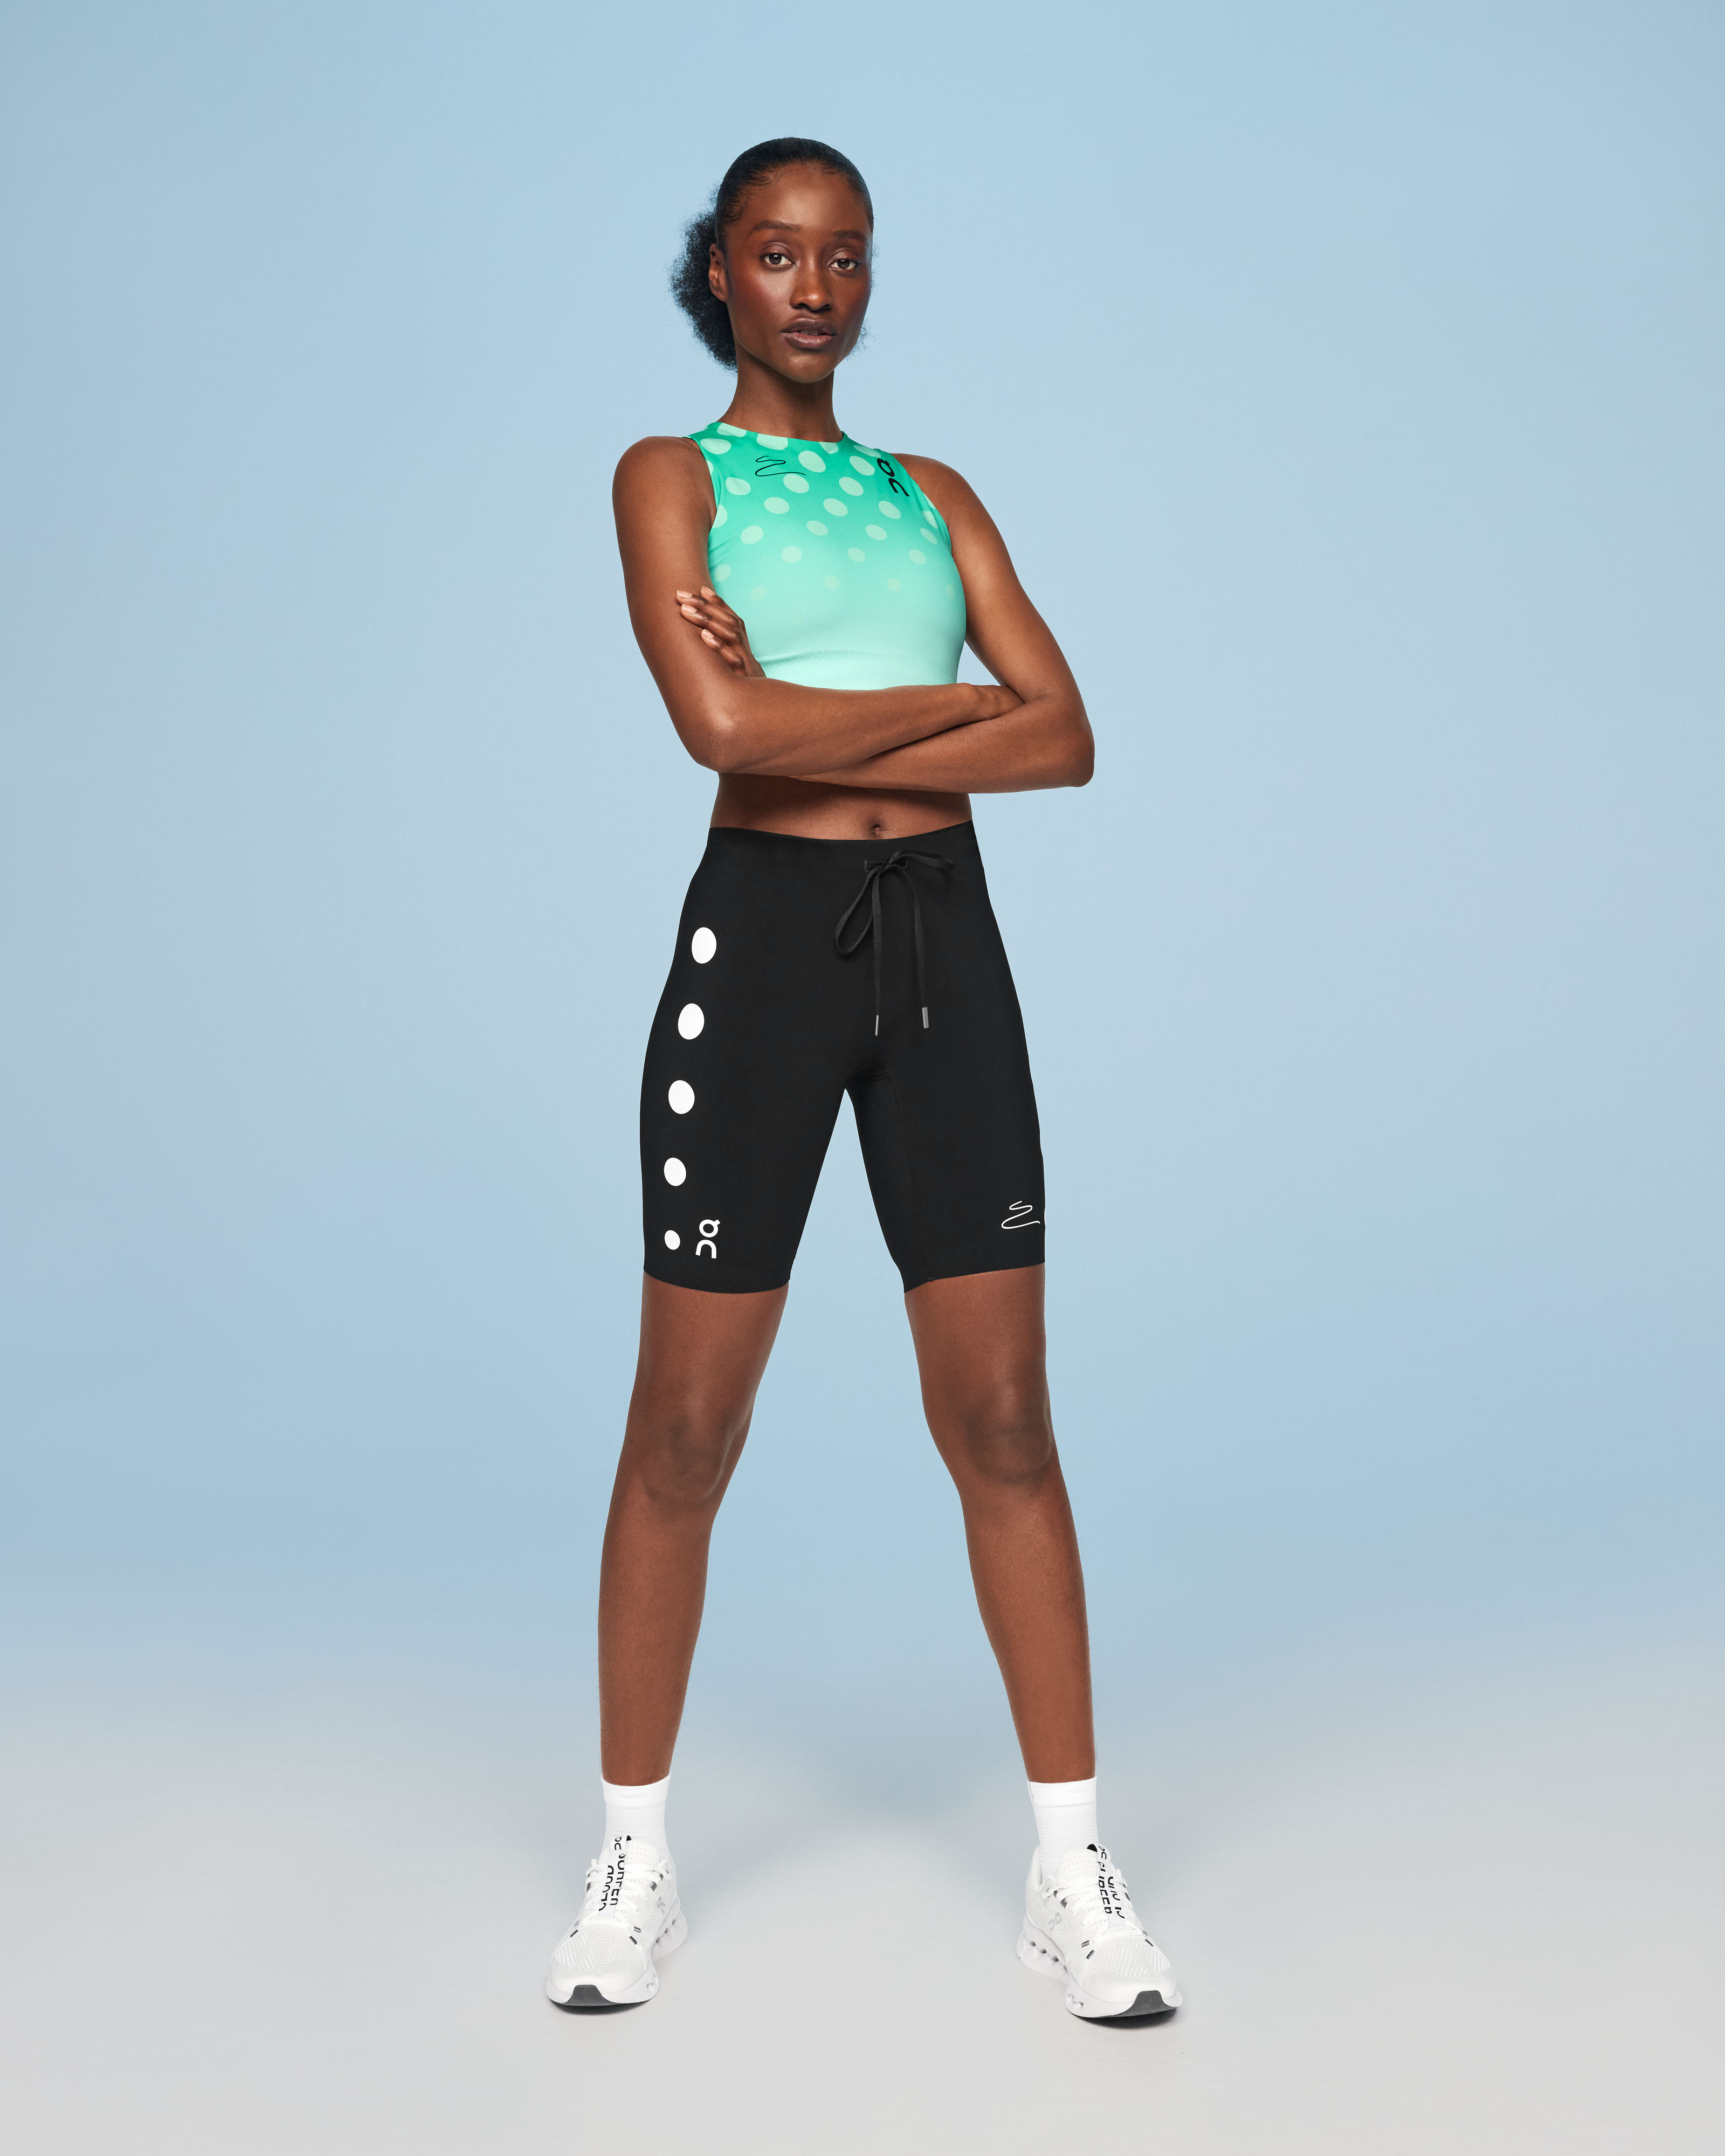 Nike Crop Top and Shorts -  Canada